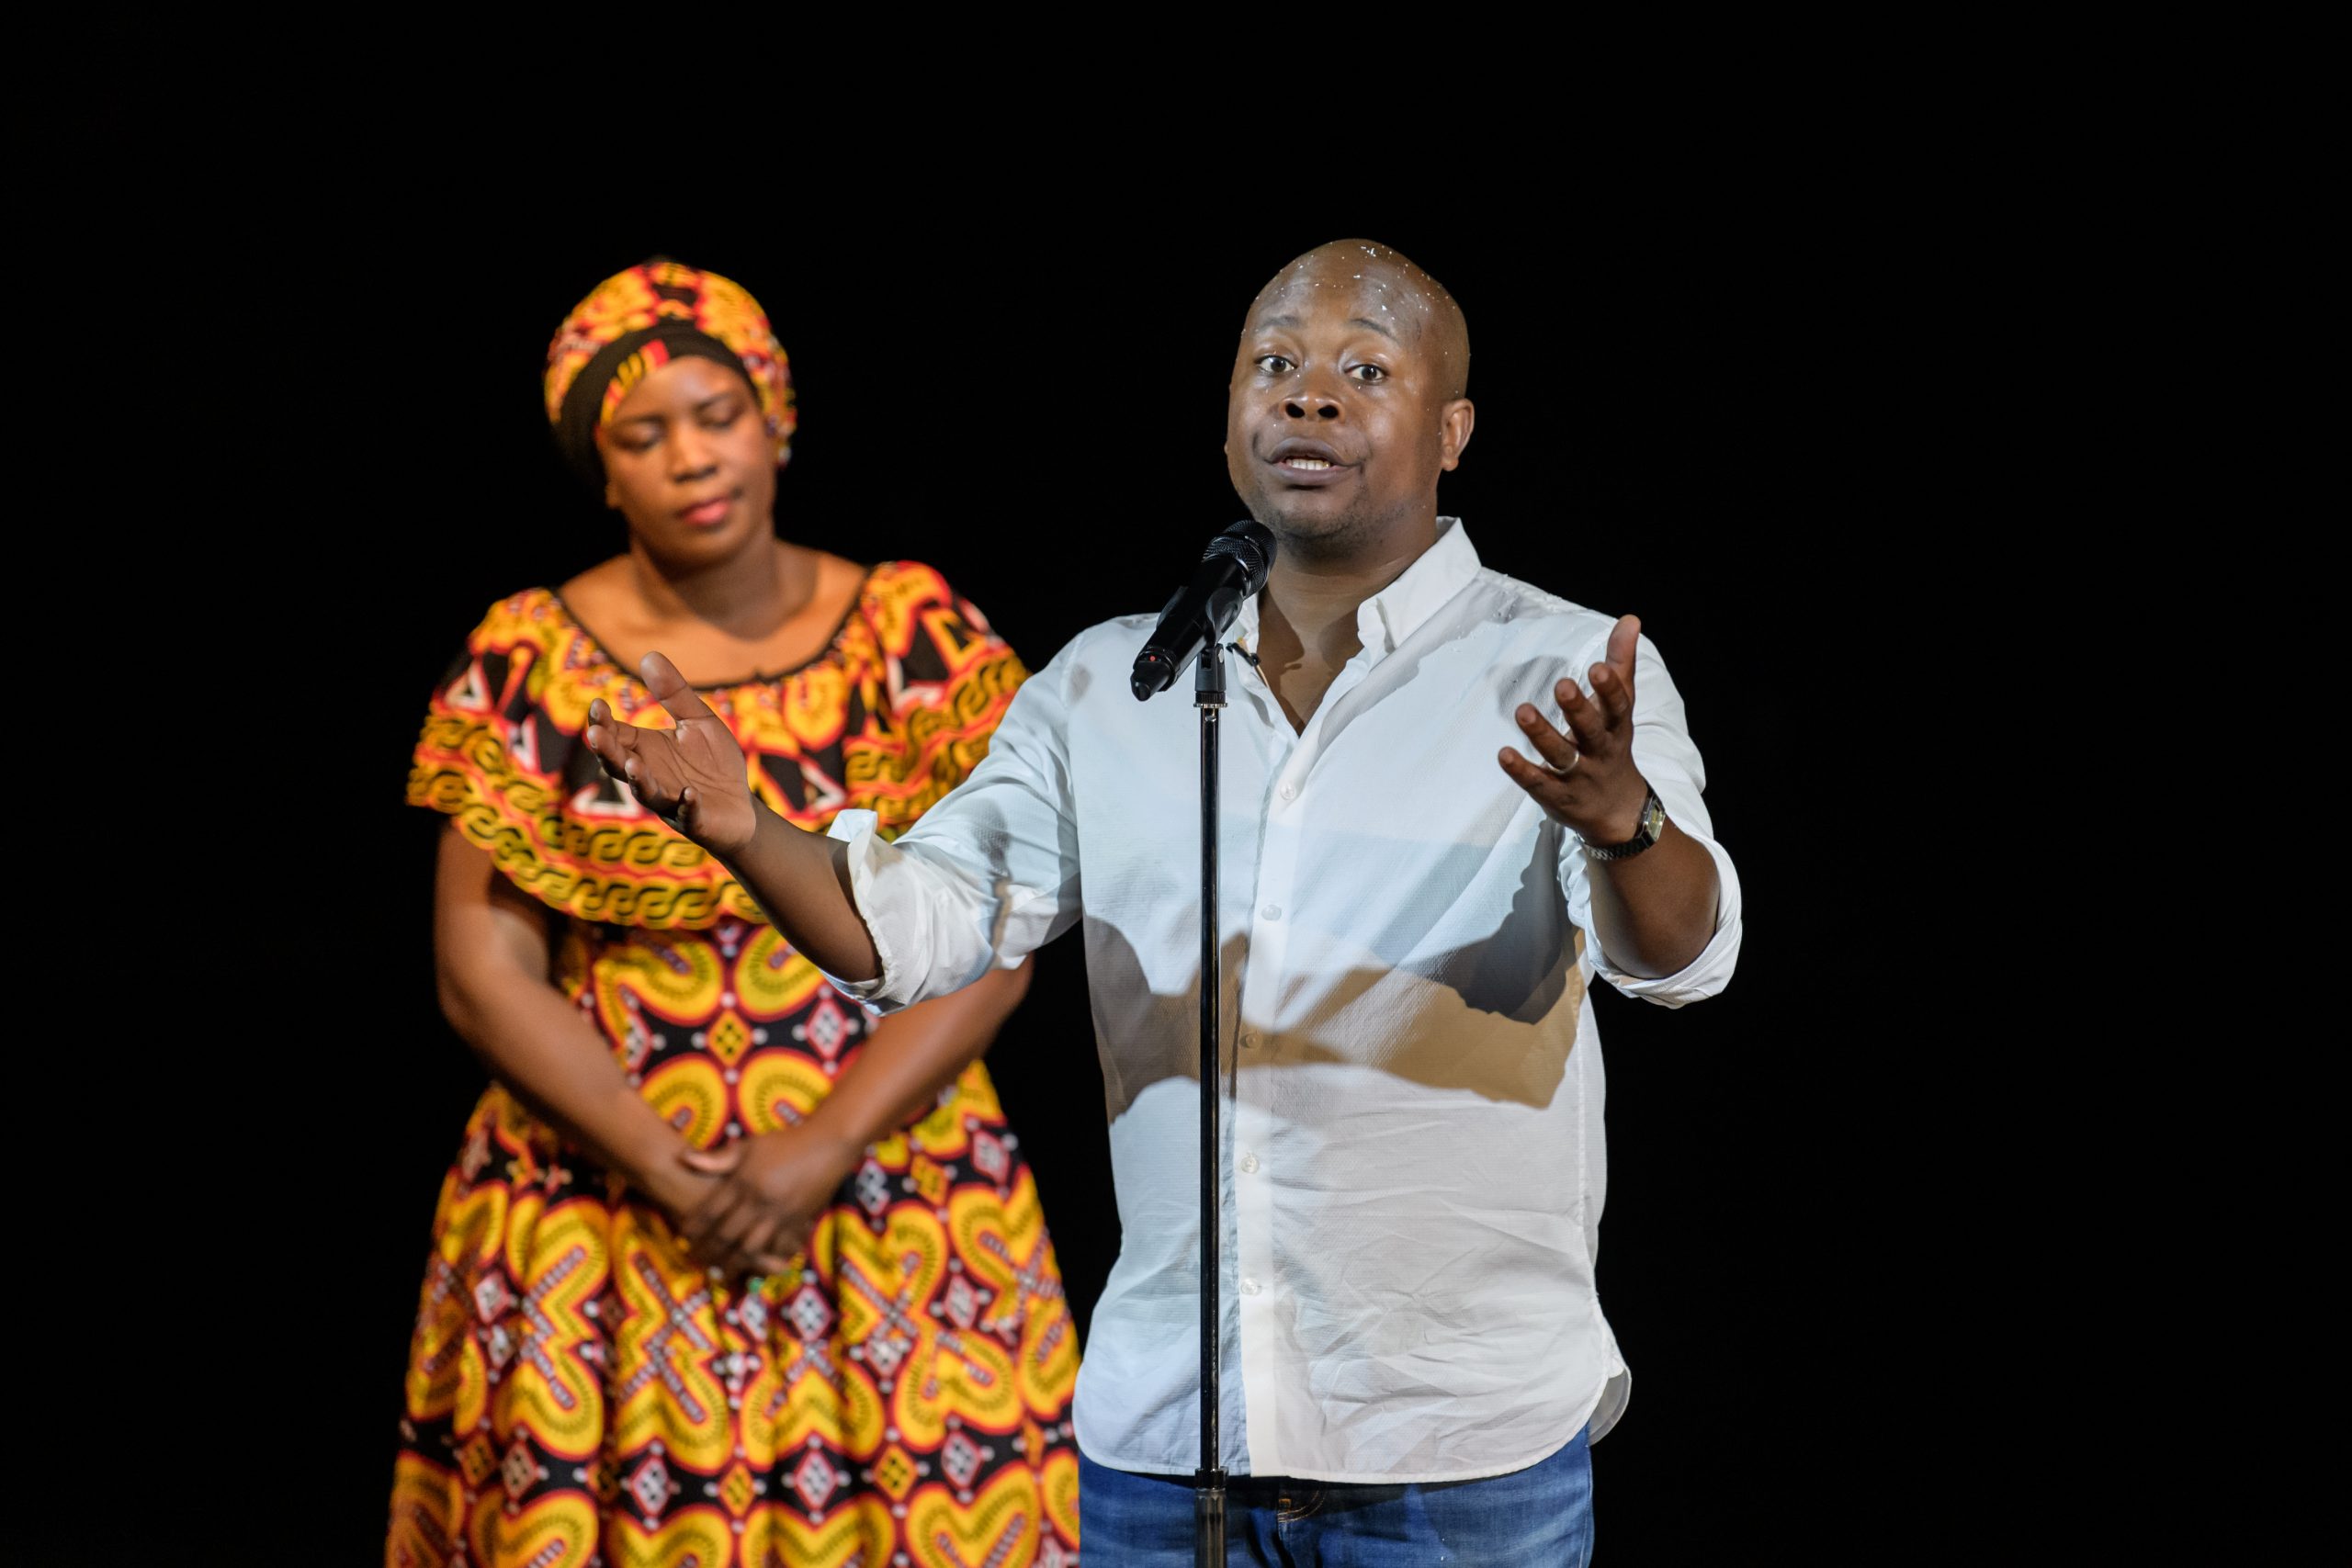 Mugabe, My Dad & Me directed by John R. Wilkinson (photos by Jane Hobson)